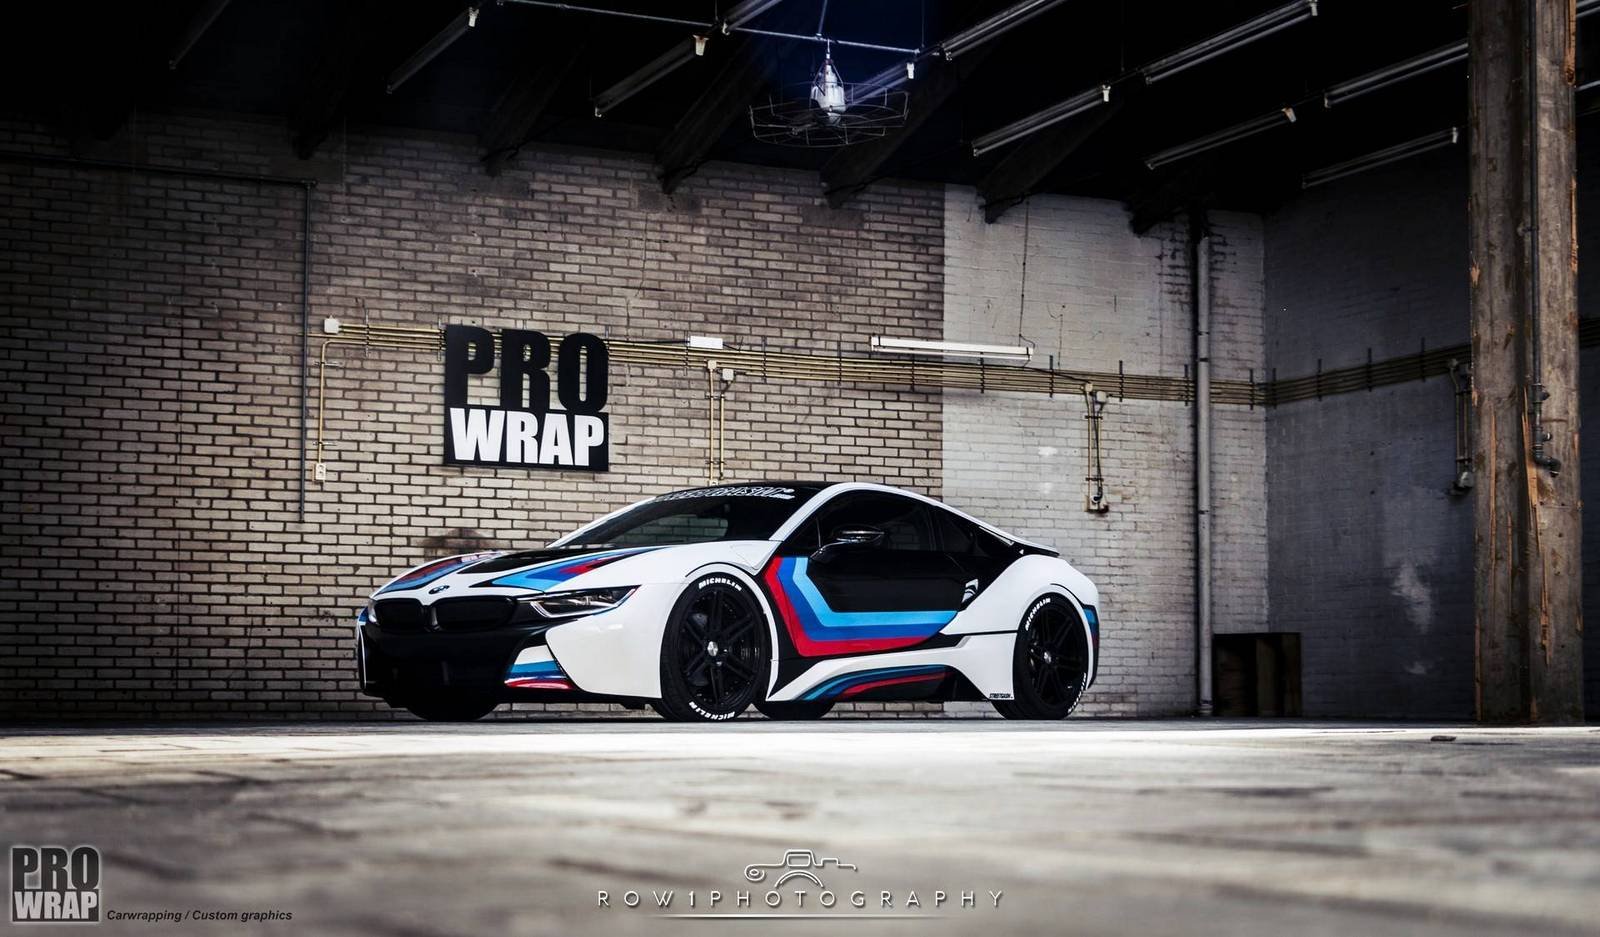 2016, Wrapped, Bmw, I8, Cars, Electric Wallpaper